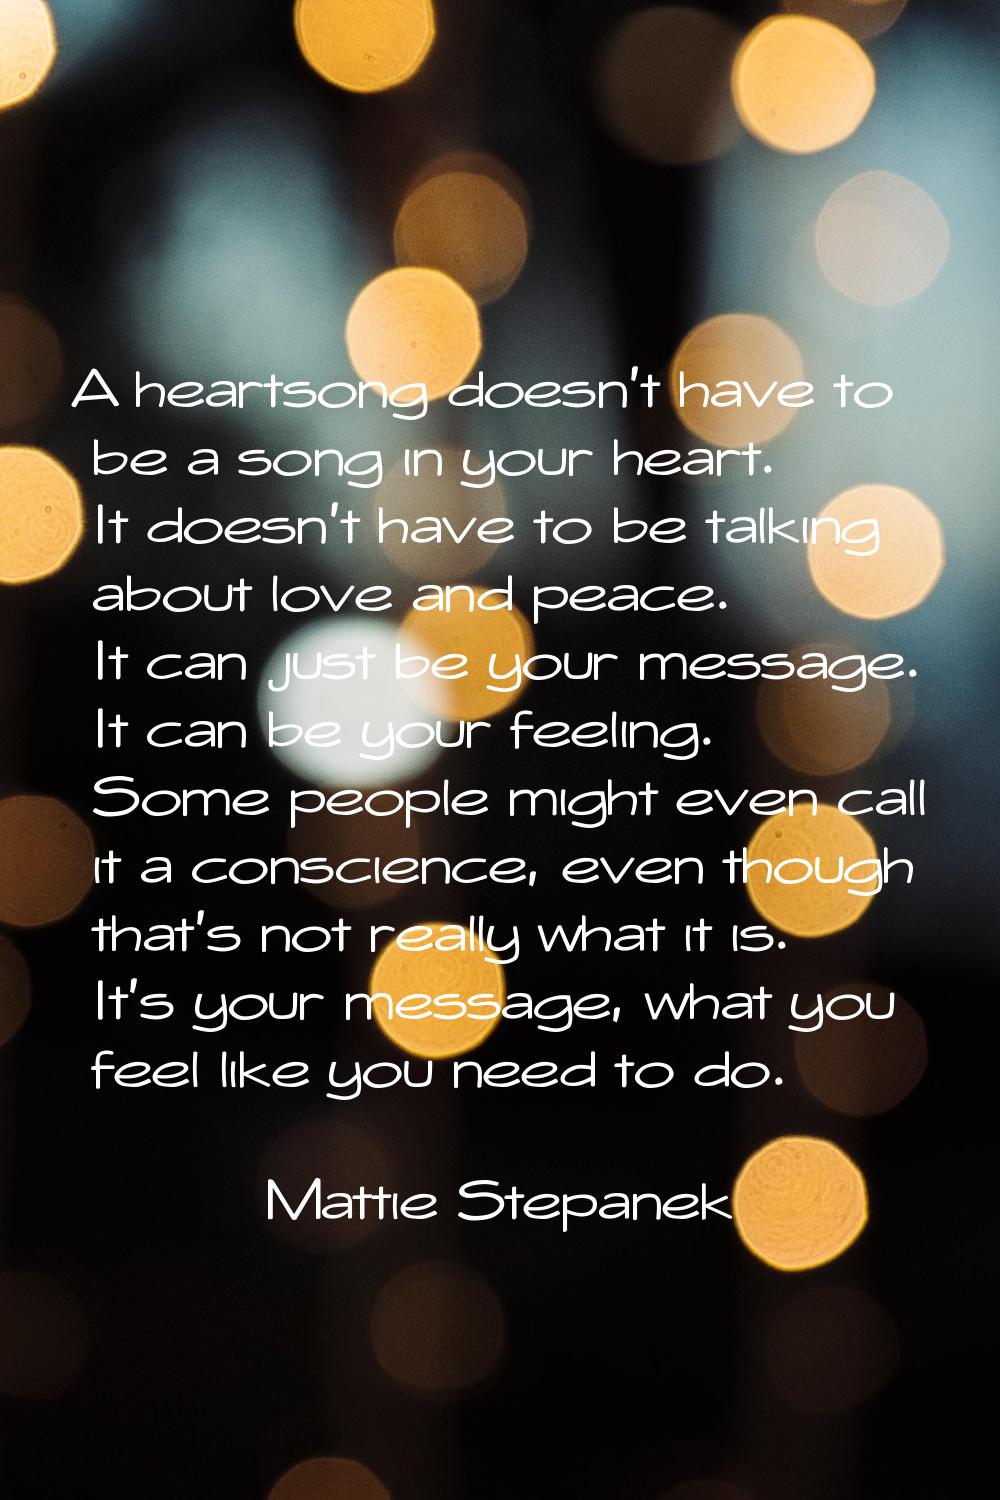 A heartsong doesn't have to be a song in your heart. It doesn't have to be talking about love and p